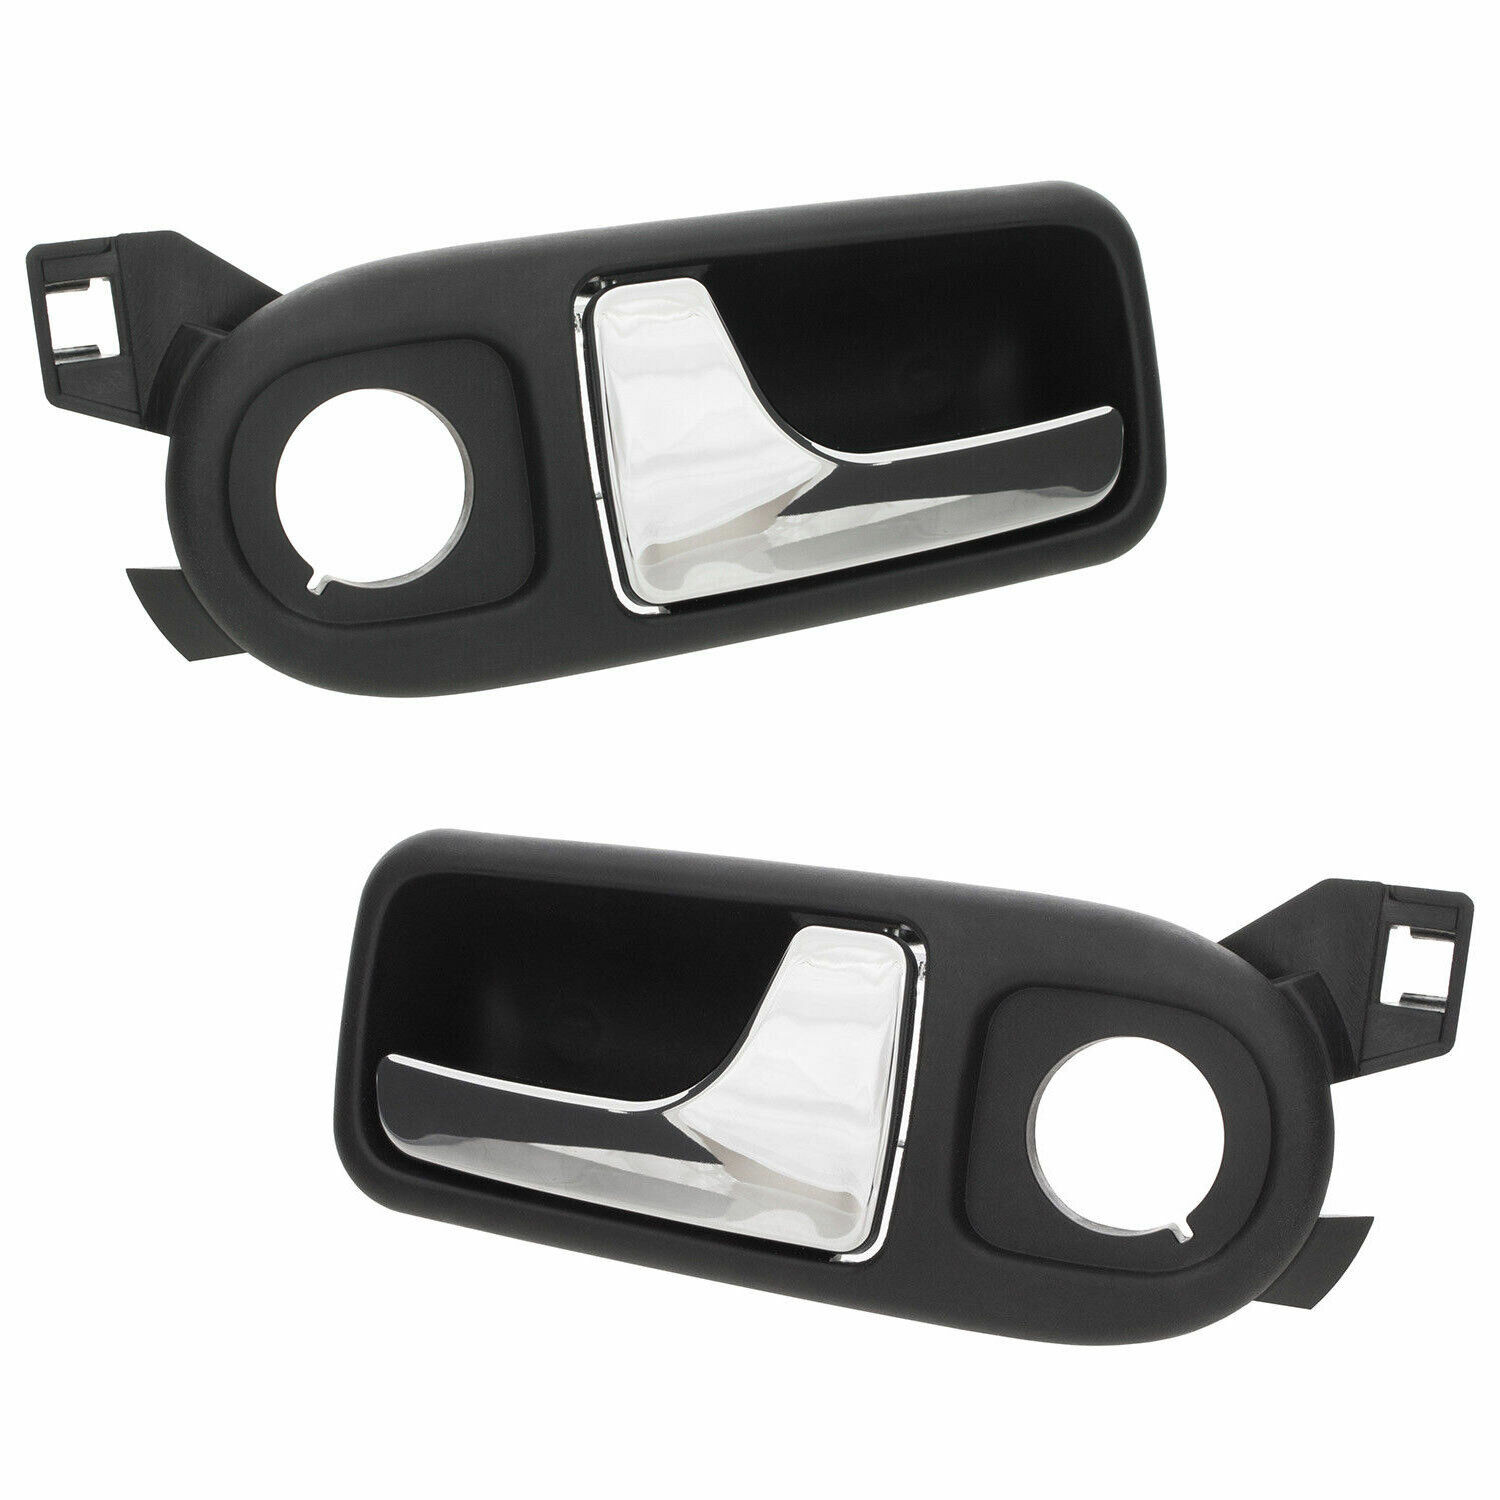 For VW Lupo / Seat Arosa door handle FRONT LEFT + RIGHT interior chrome in black